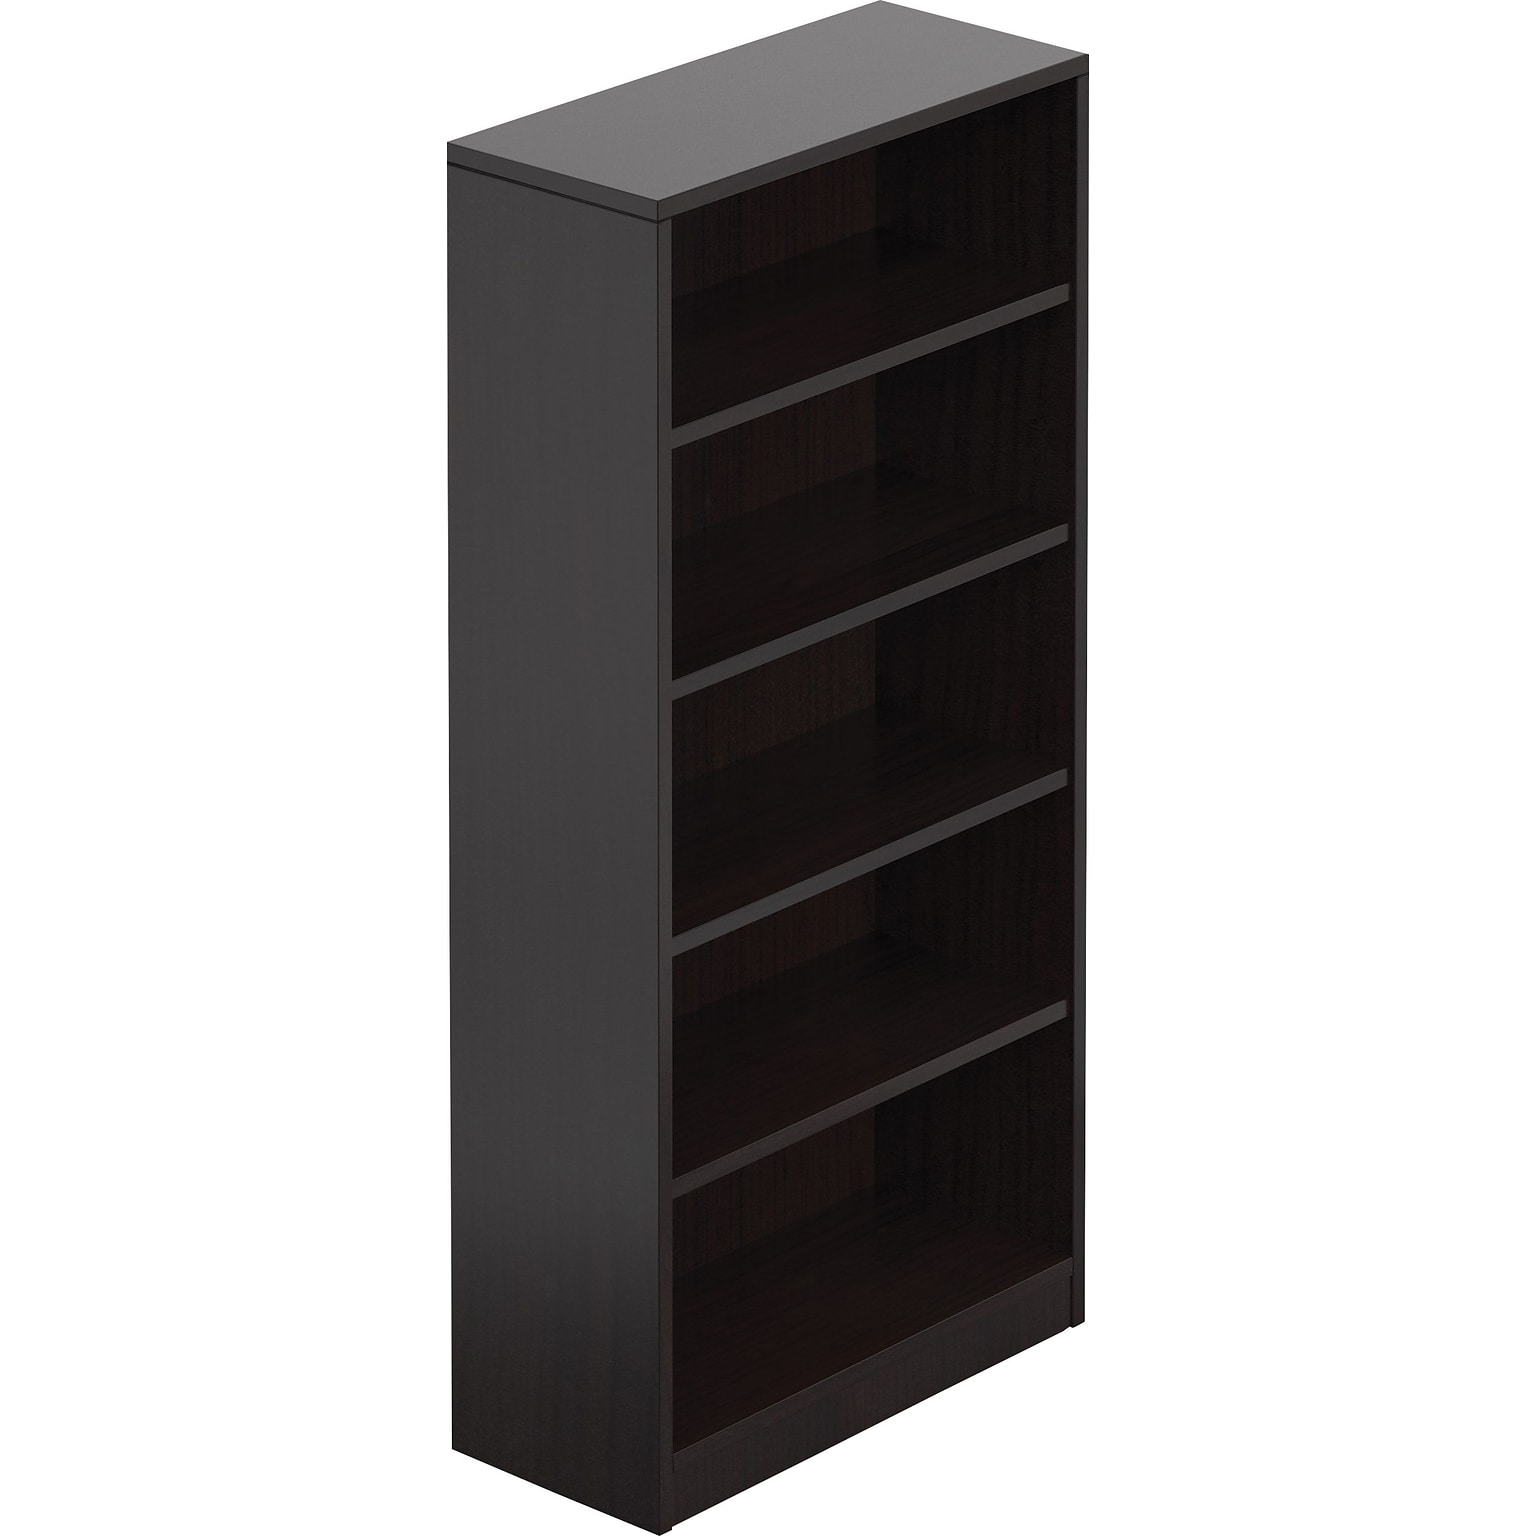 Offices to Go Superior Laminate 71H 4-Shelf Bookcase with Adjustable Shelves, American Espresso (TDSL71BC-AEL)